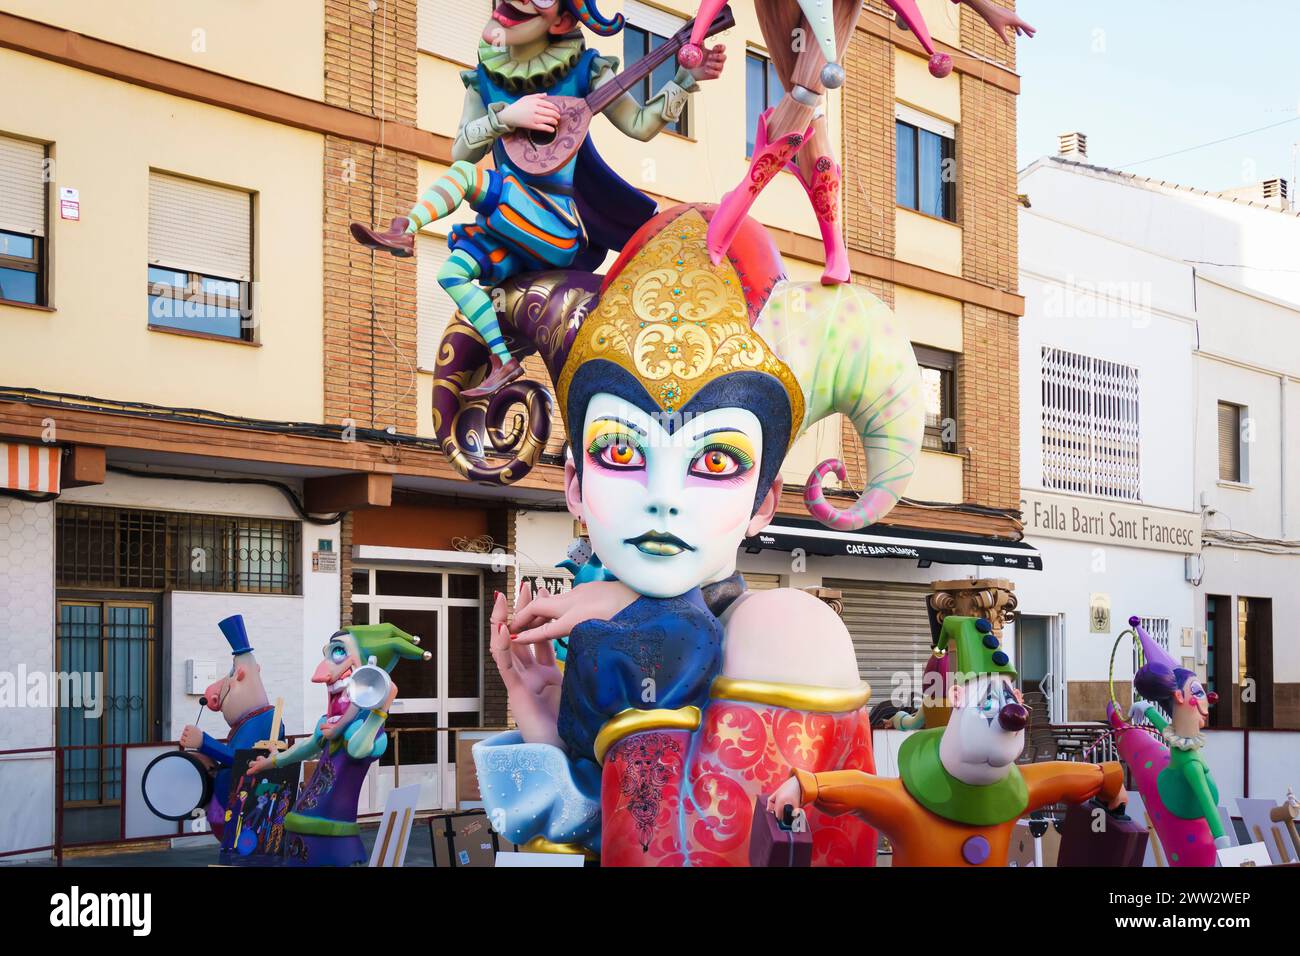 The wooden and papier mache sculptures and monuments known as Las Fallas in celebration of St Joseph's day in the Valencian town of Oliva, Spain Stock Photo